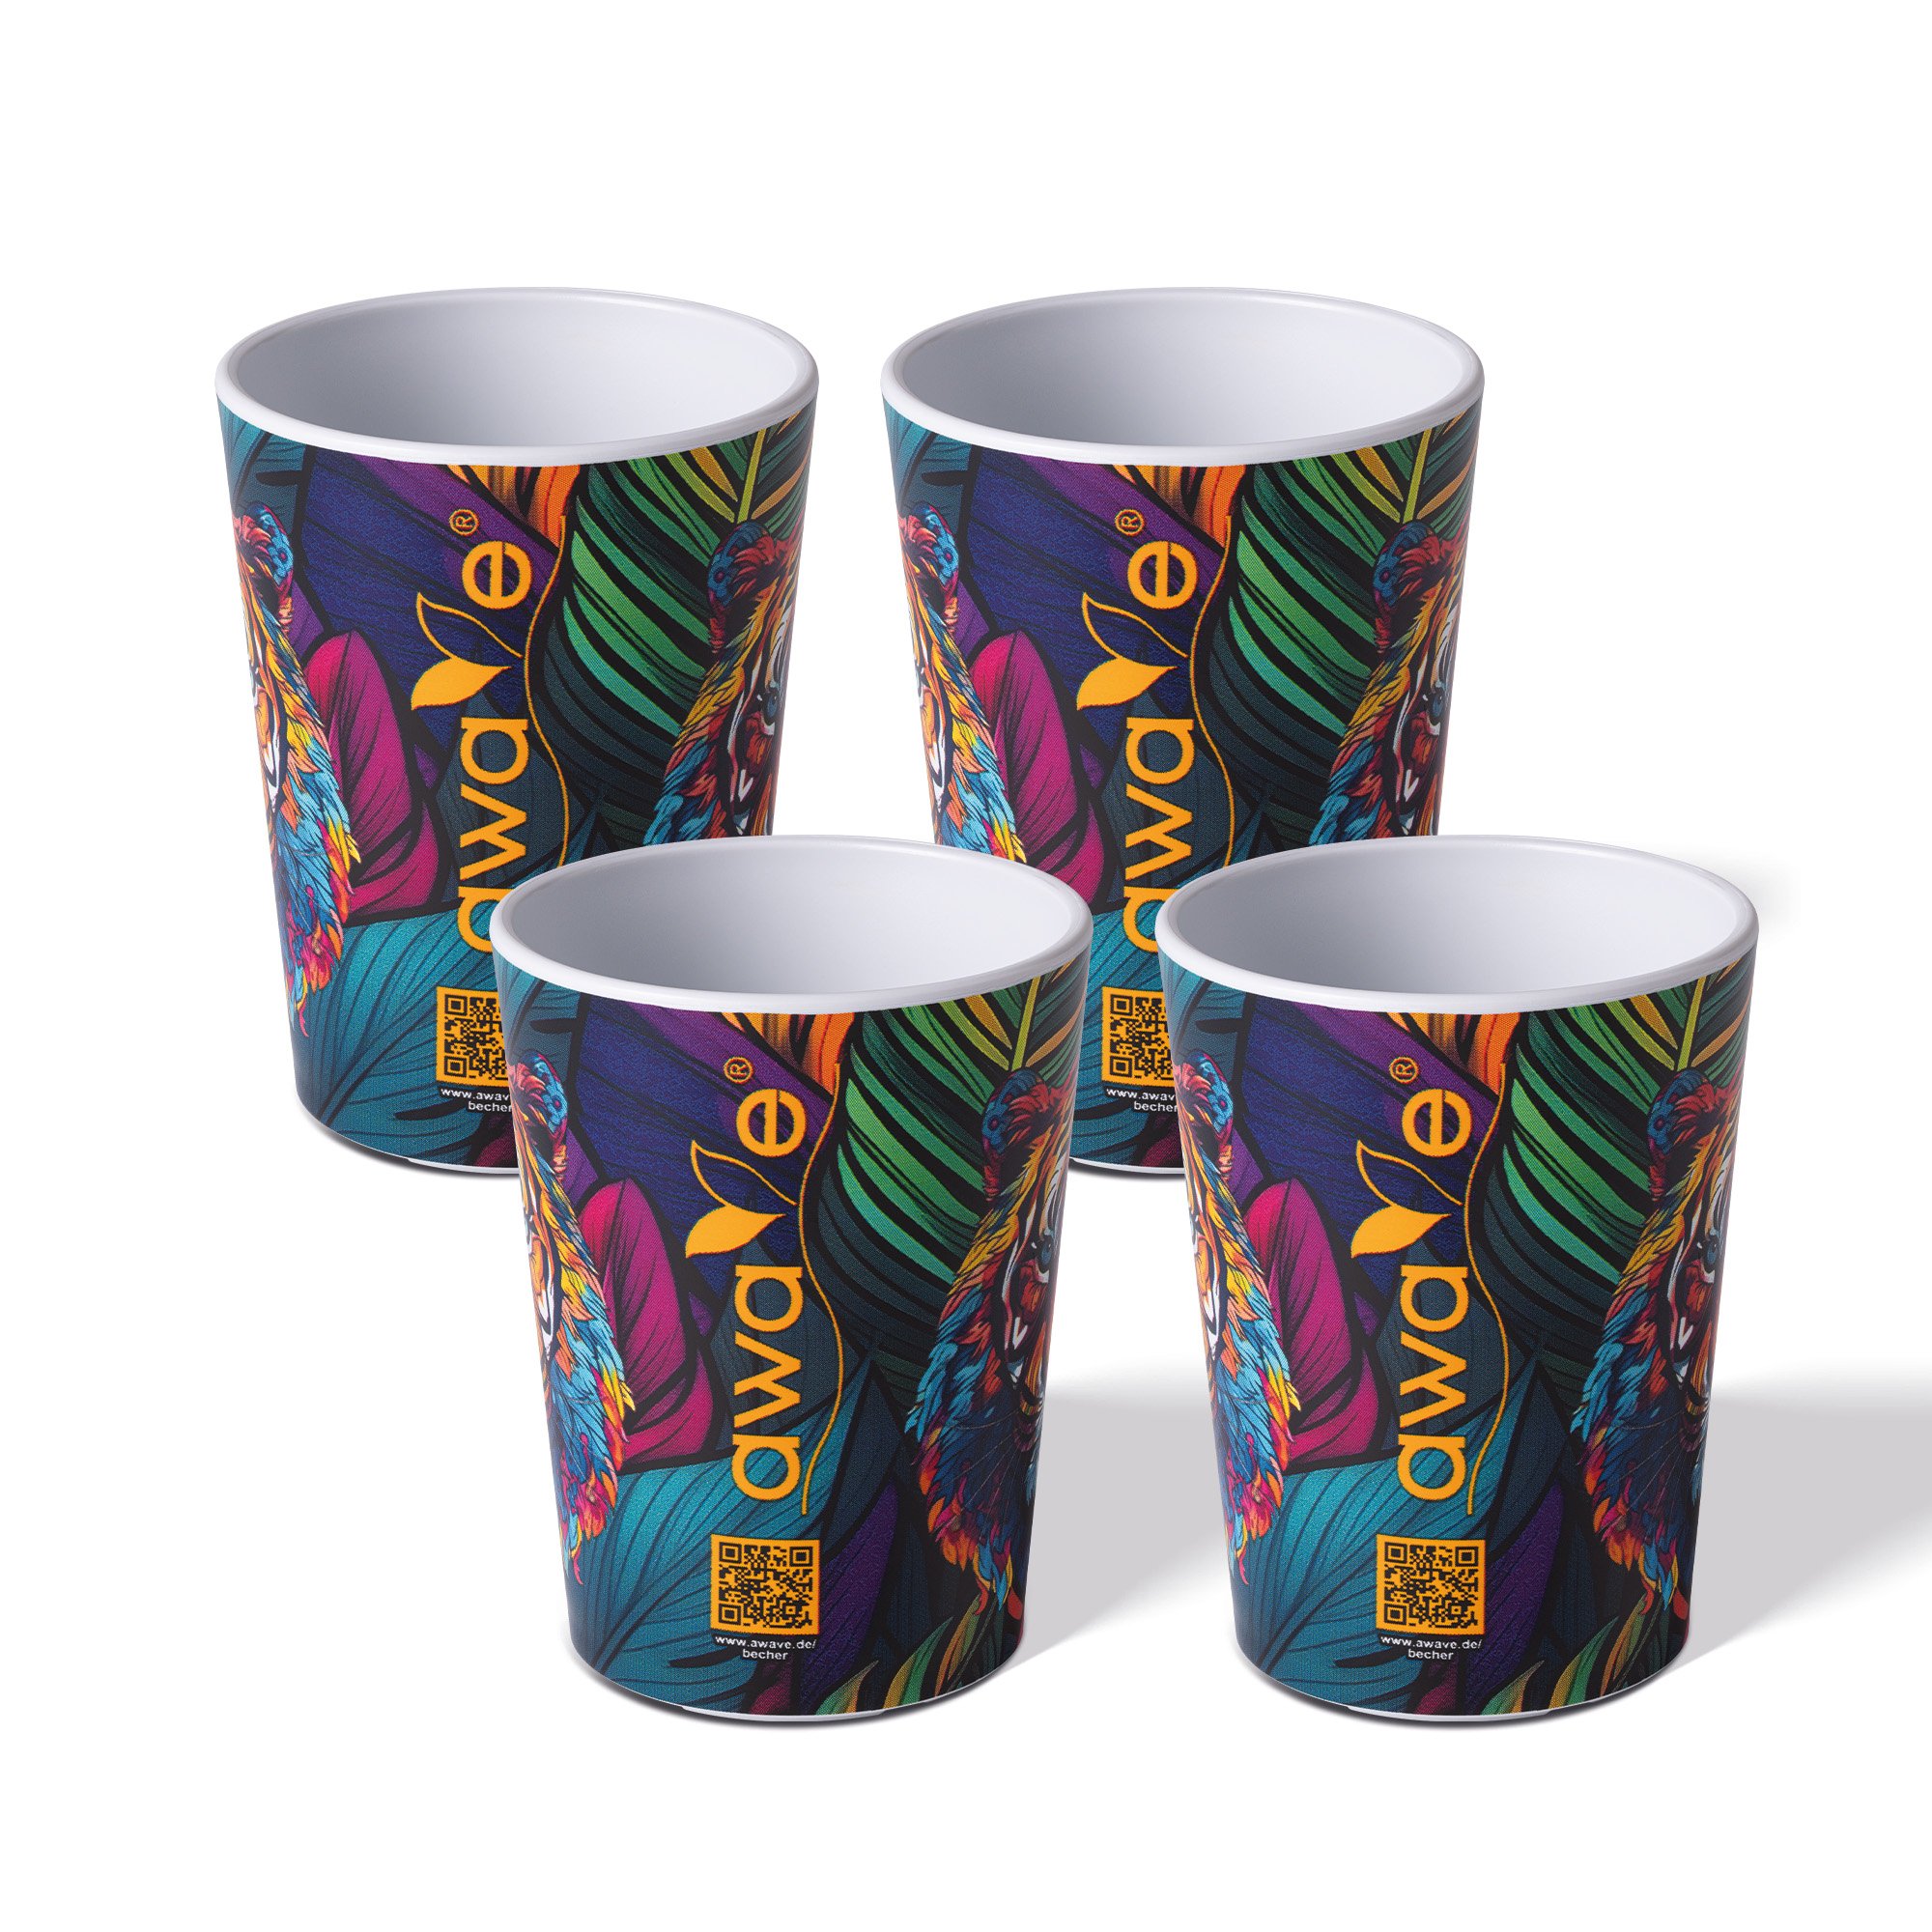 AWAVE® 4 pc Shot Glasses Set, 4 cl, made of rPET, Calibration Mark at 2 cl and 4 cl, Stackable